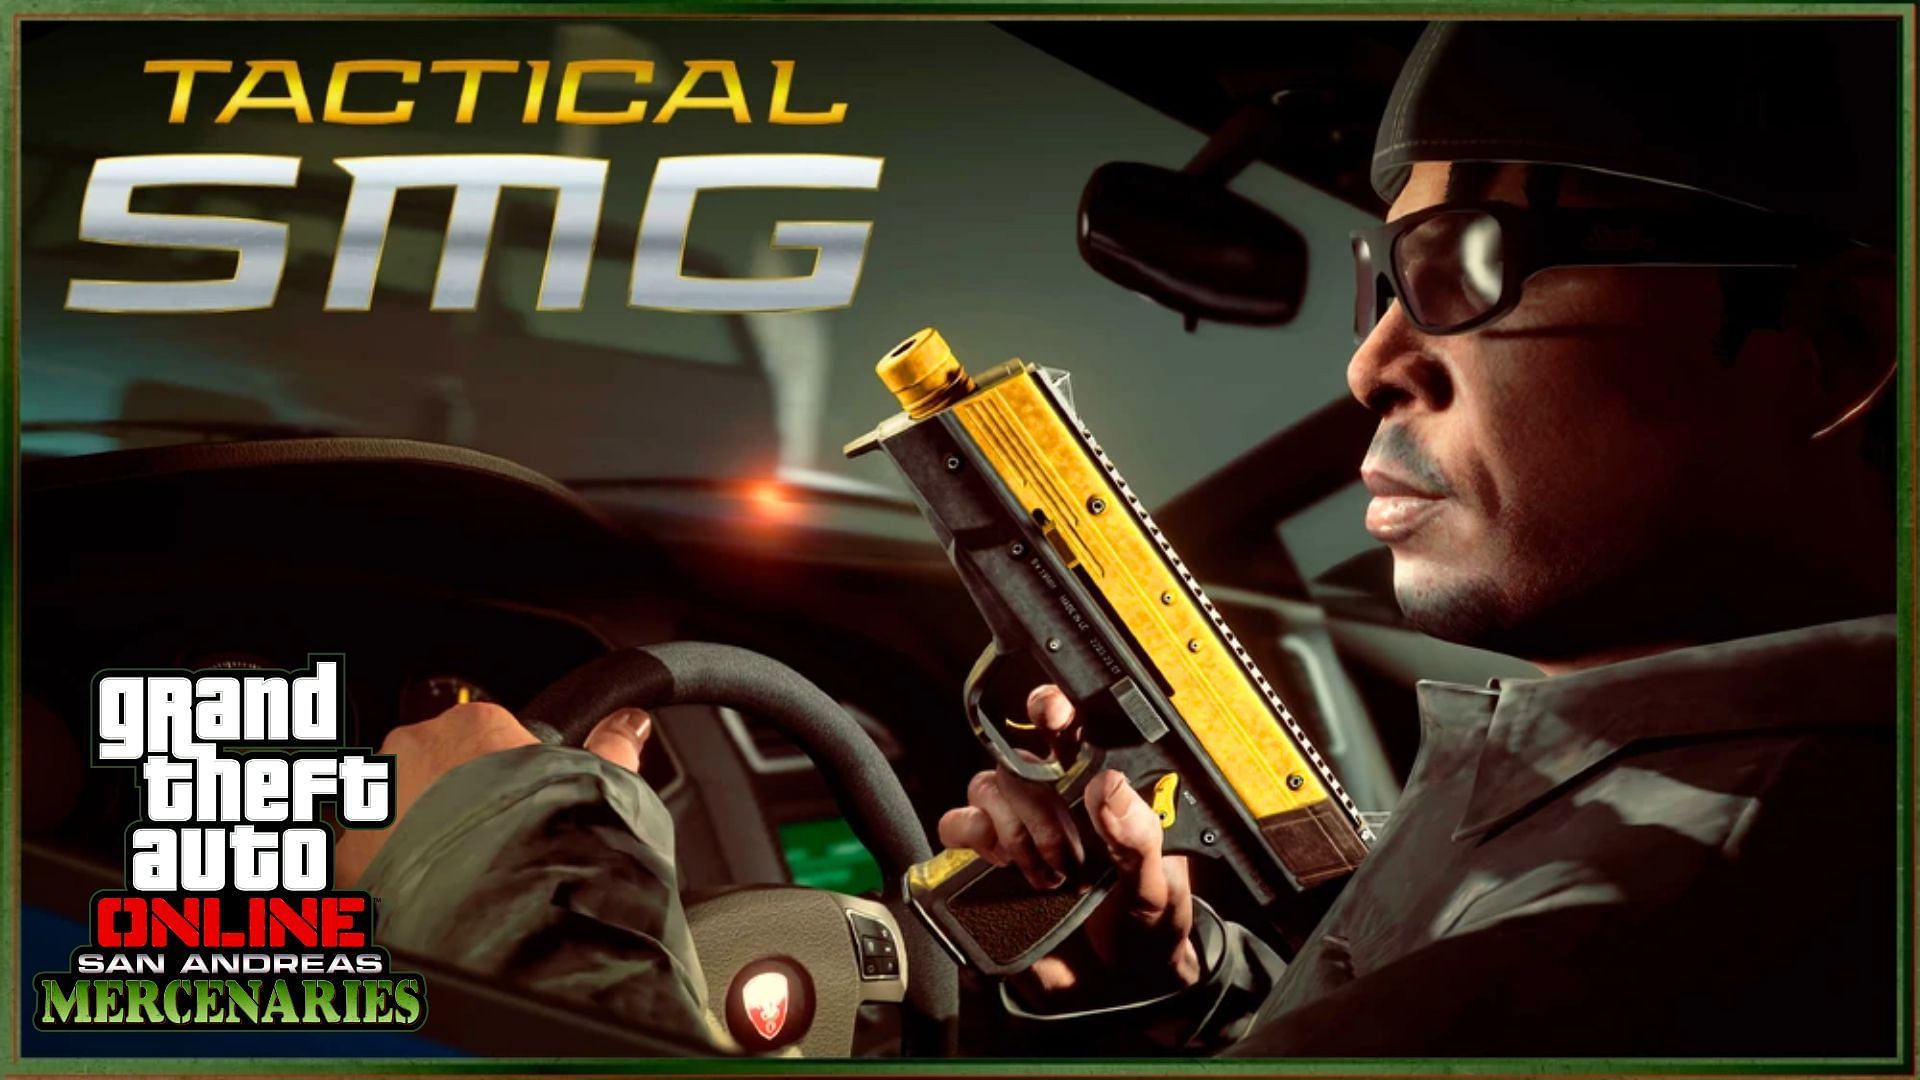 The Tactical SMG is now available in GTA Online (Image via Rockstar Games)